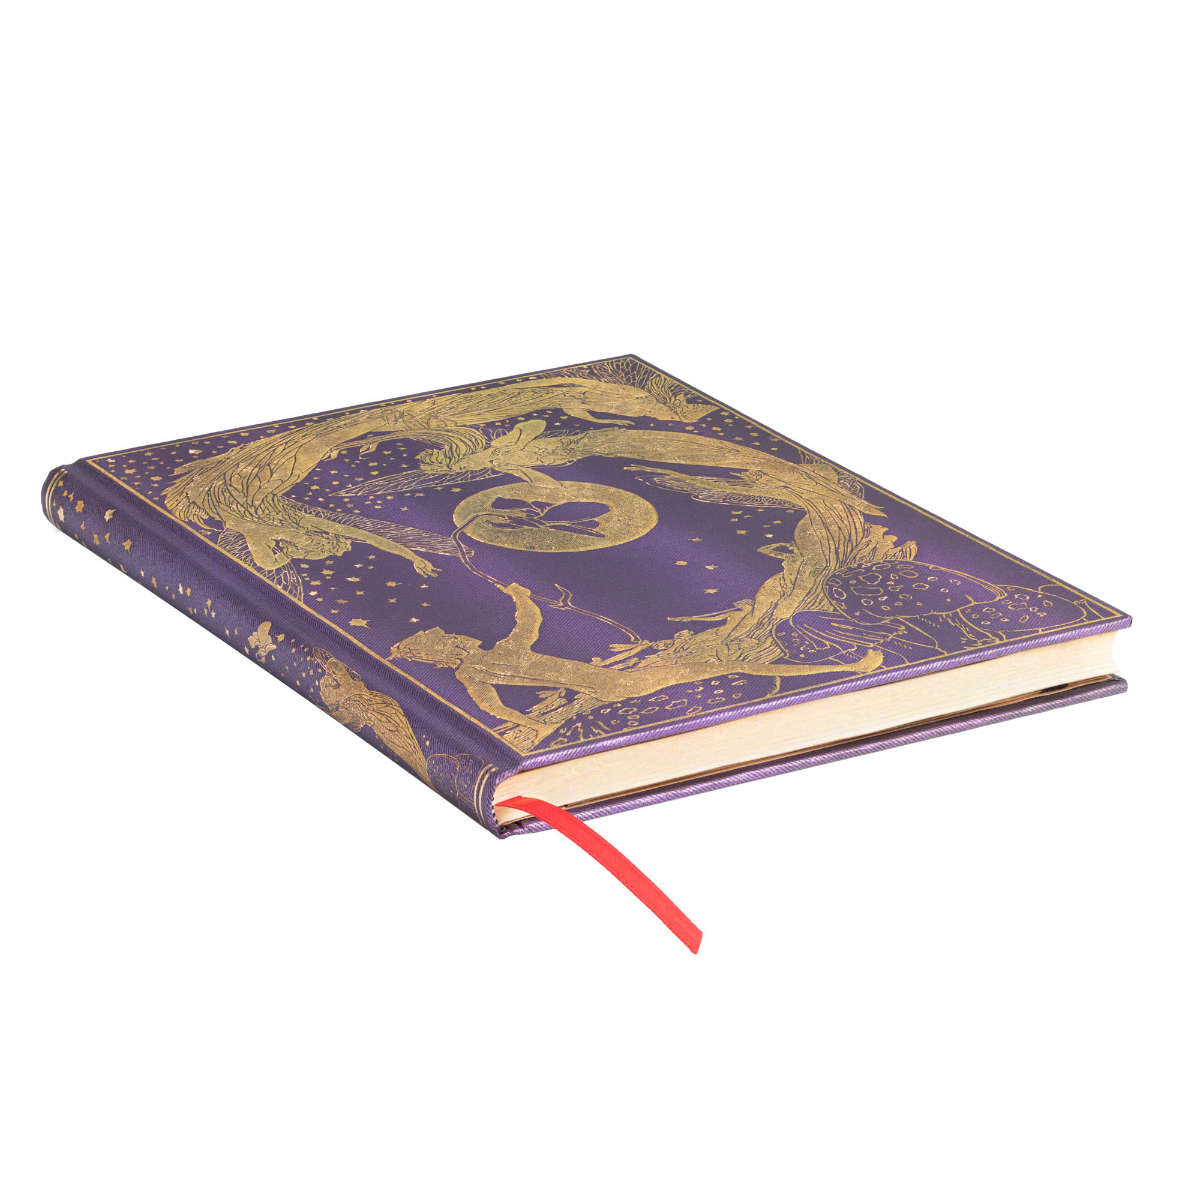 Paperblanks Lang's Fairy Violet Ultra 7 x 9 Inch Journal